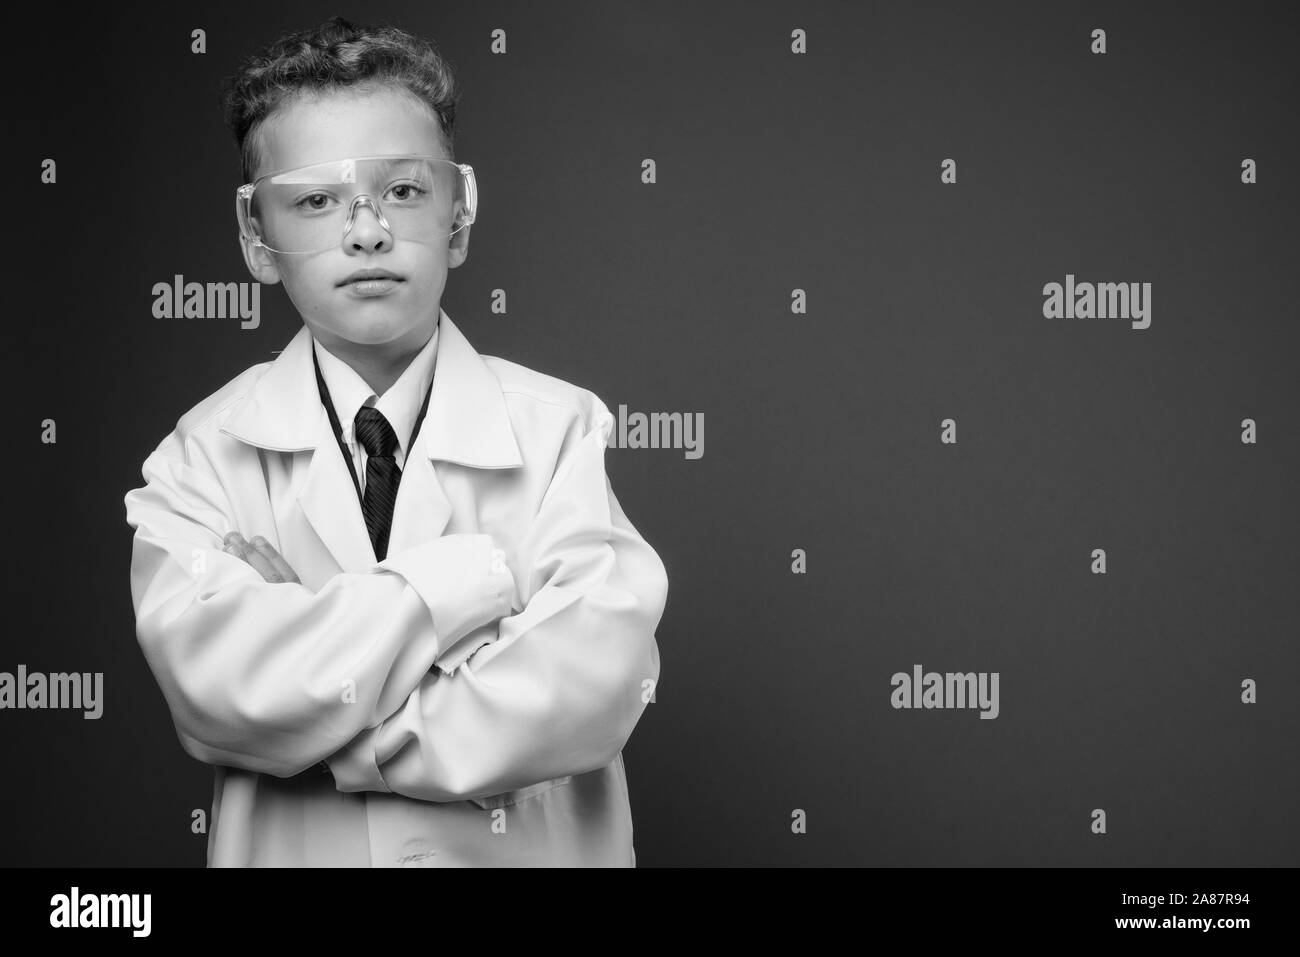 Young boy as doctor wearing protective glasses in black and white Stock Photo